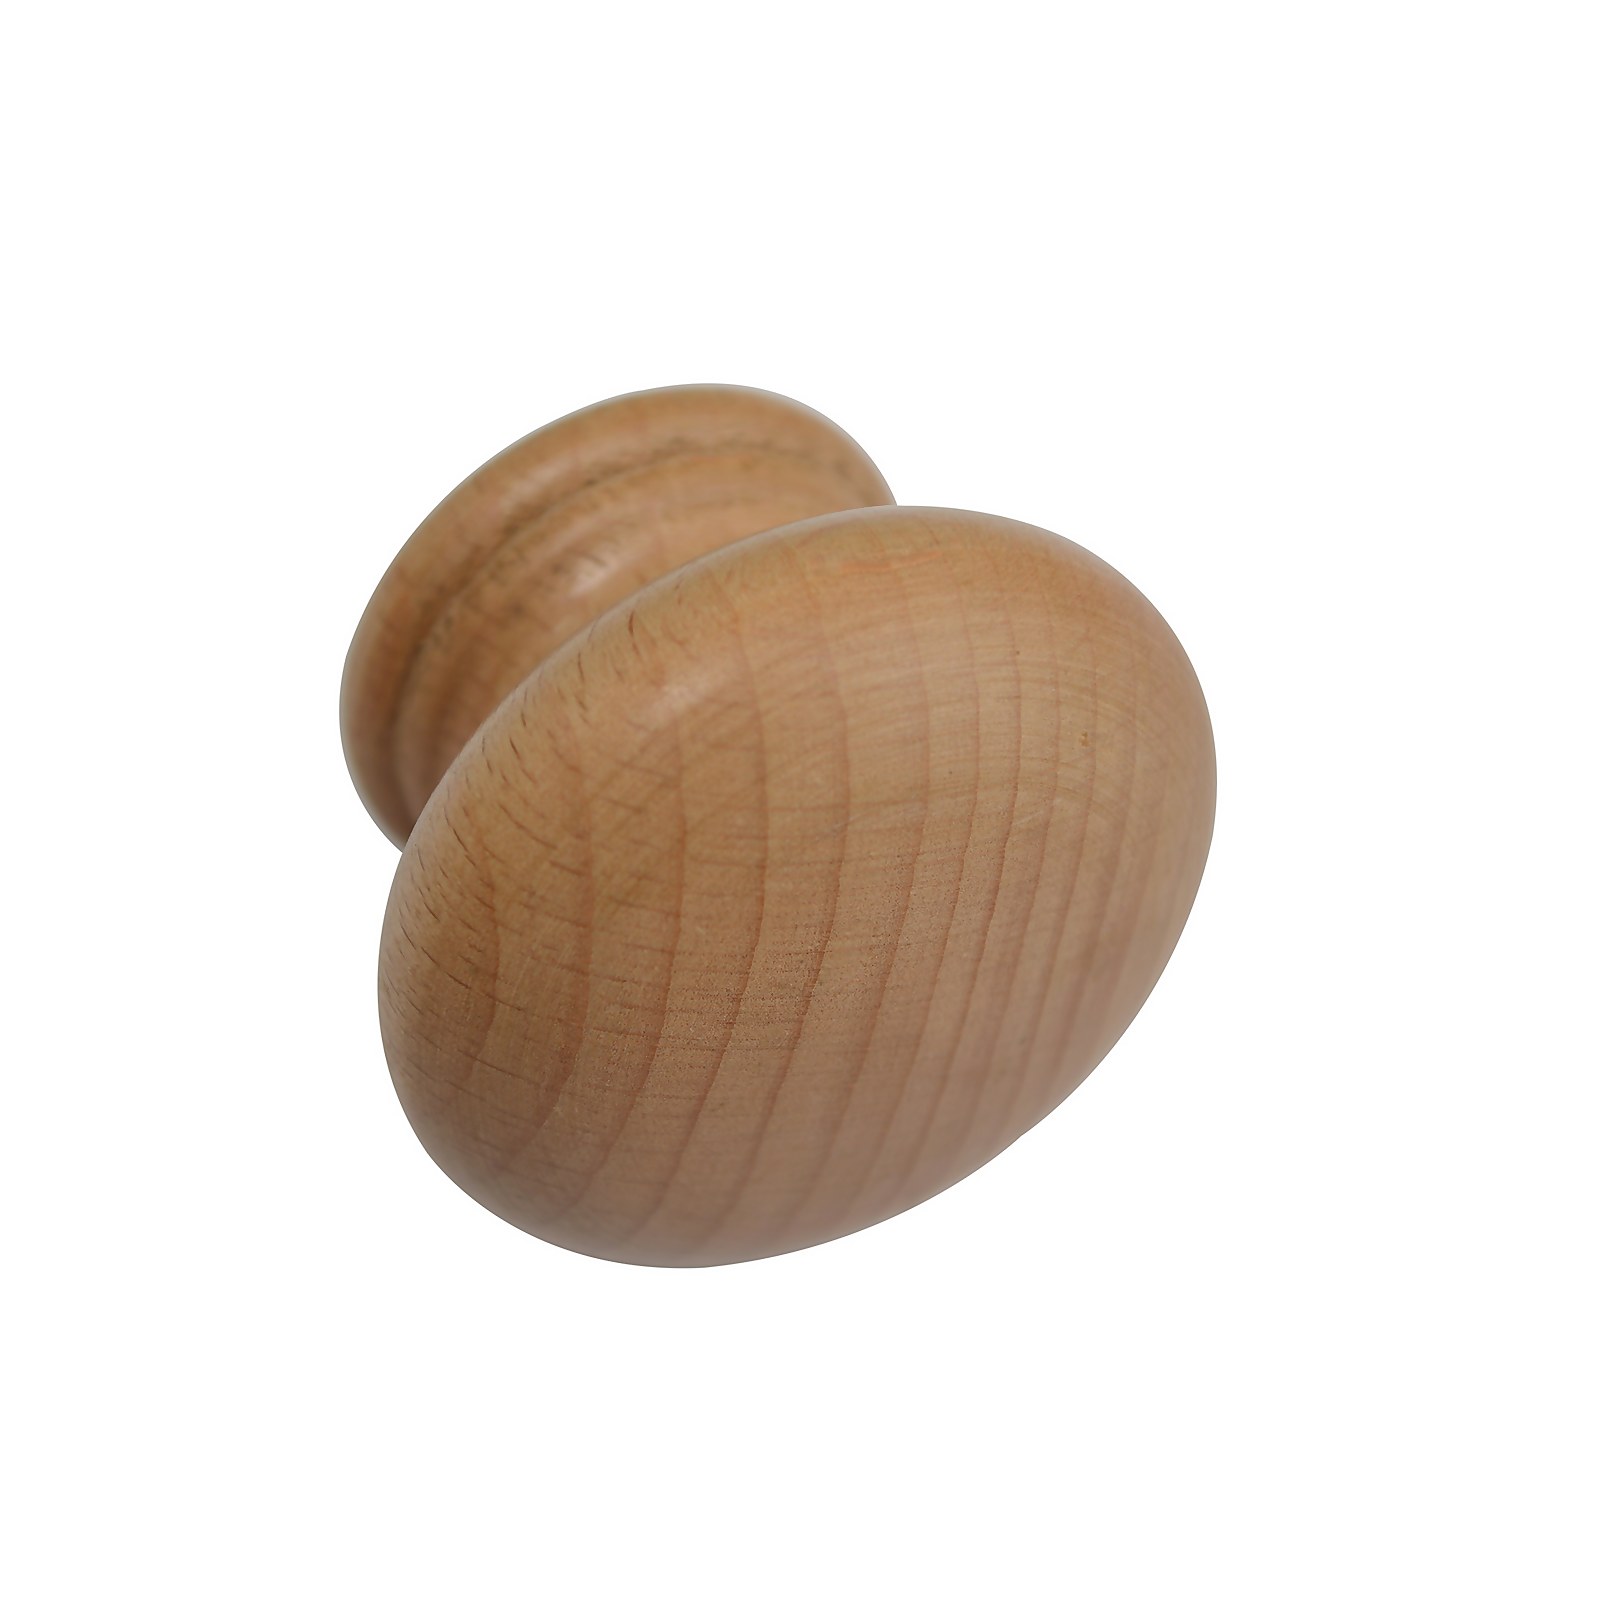 Photo of Large 96mm Varnished Beech Wooden Cabinet Knob - 2 Pack